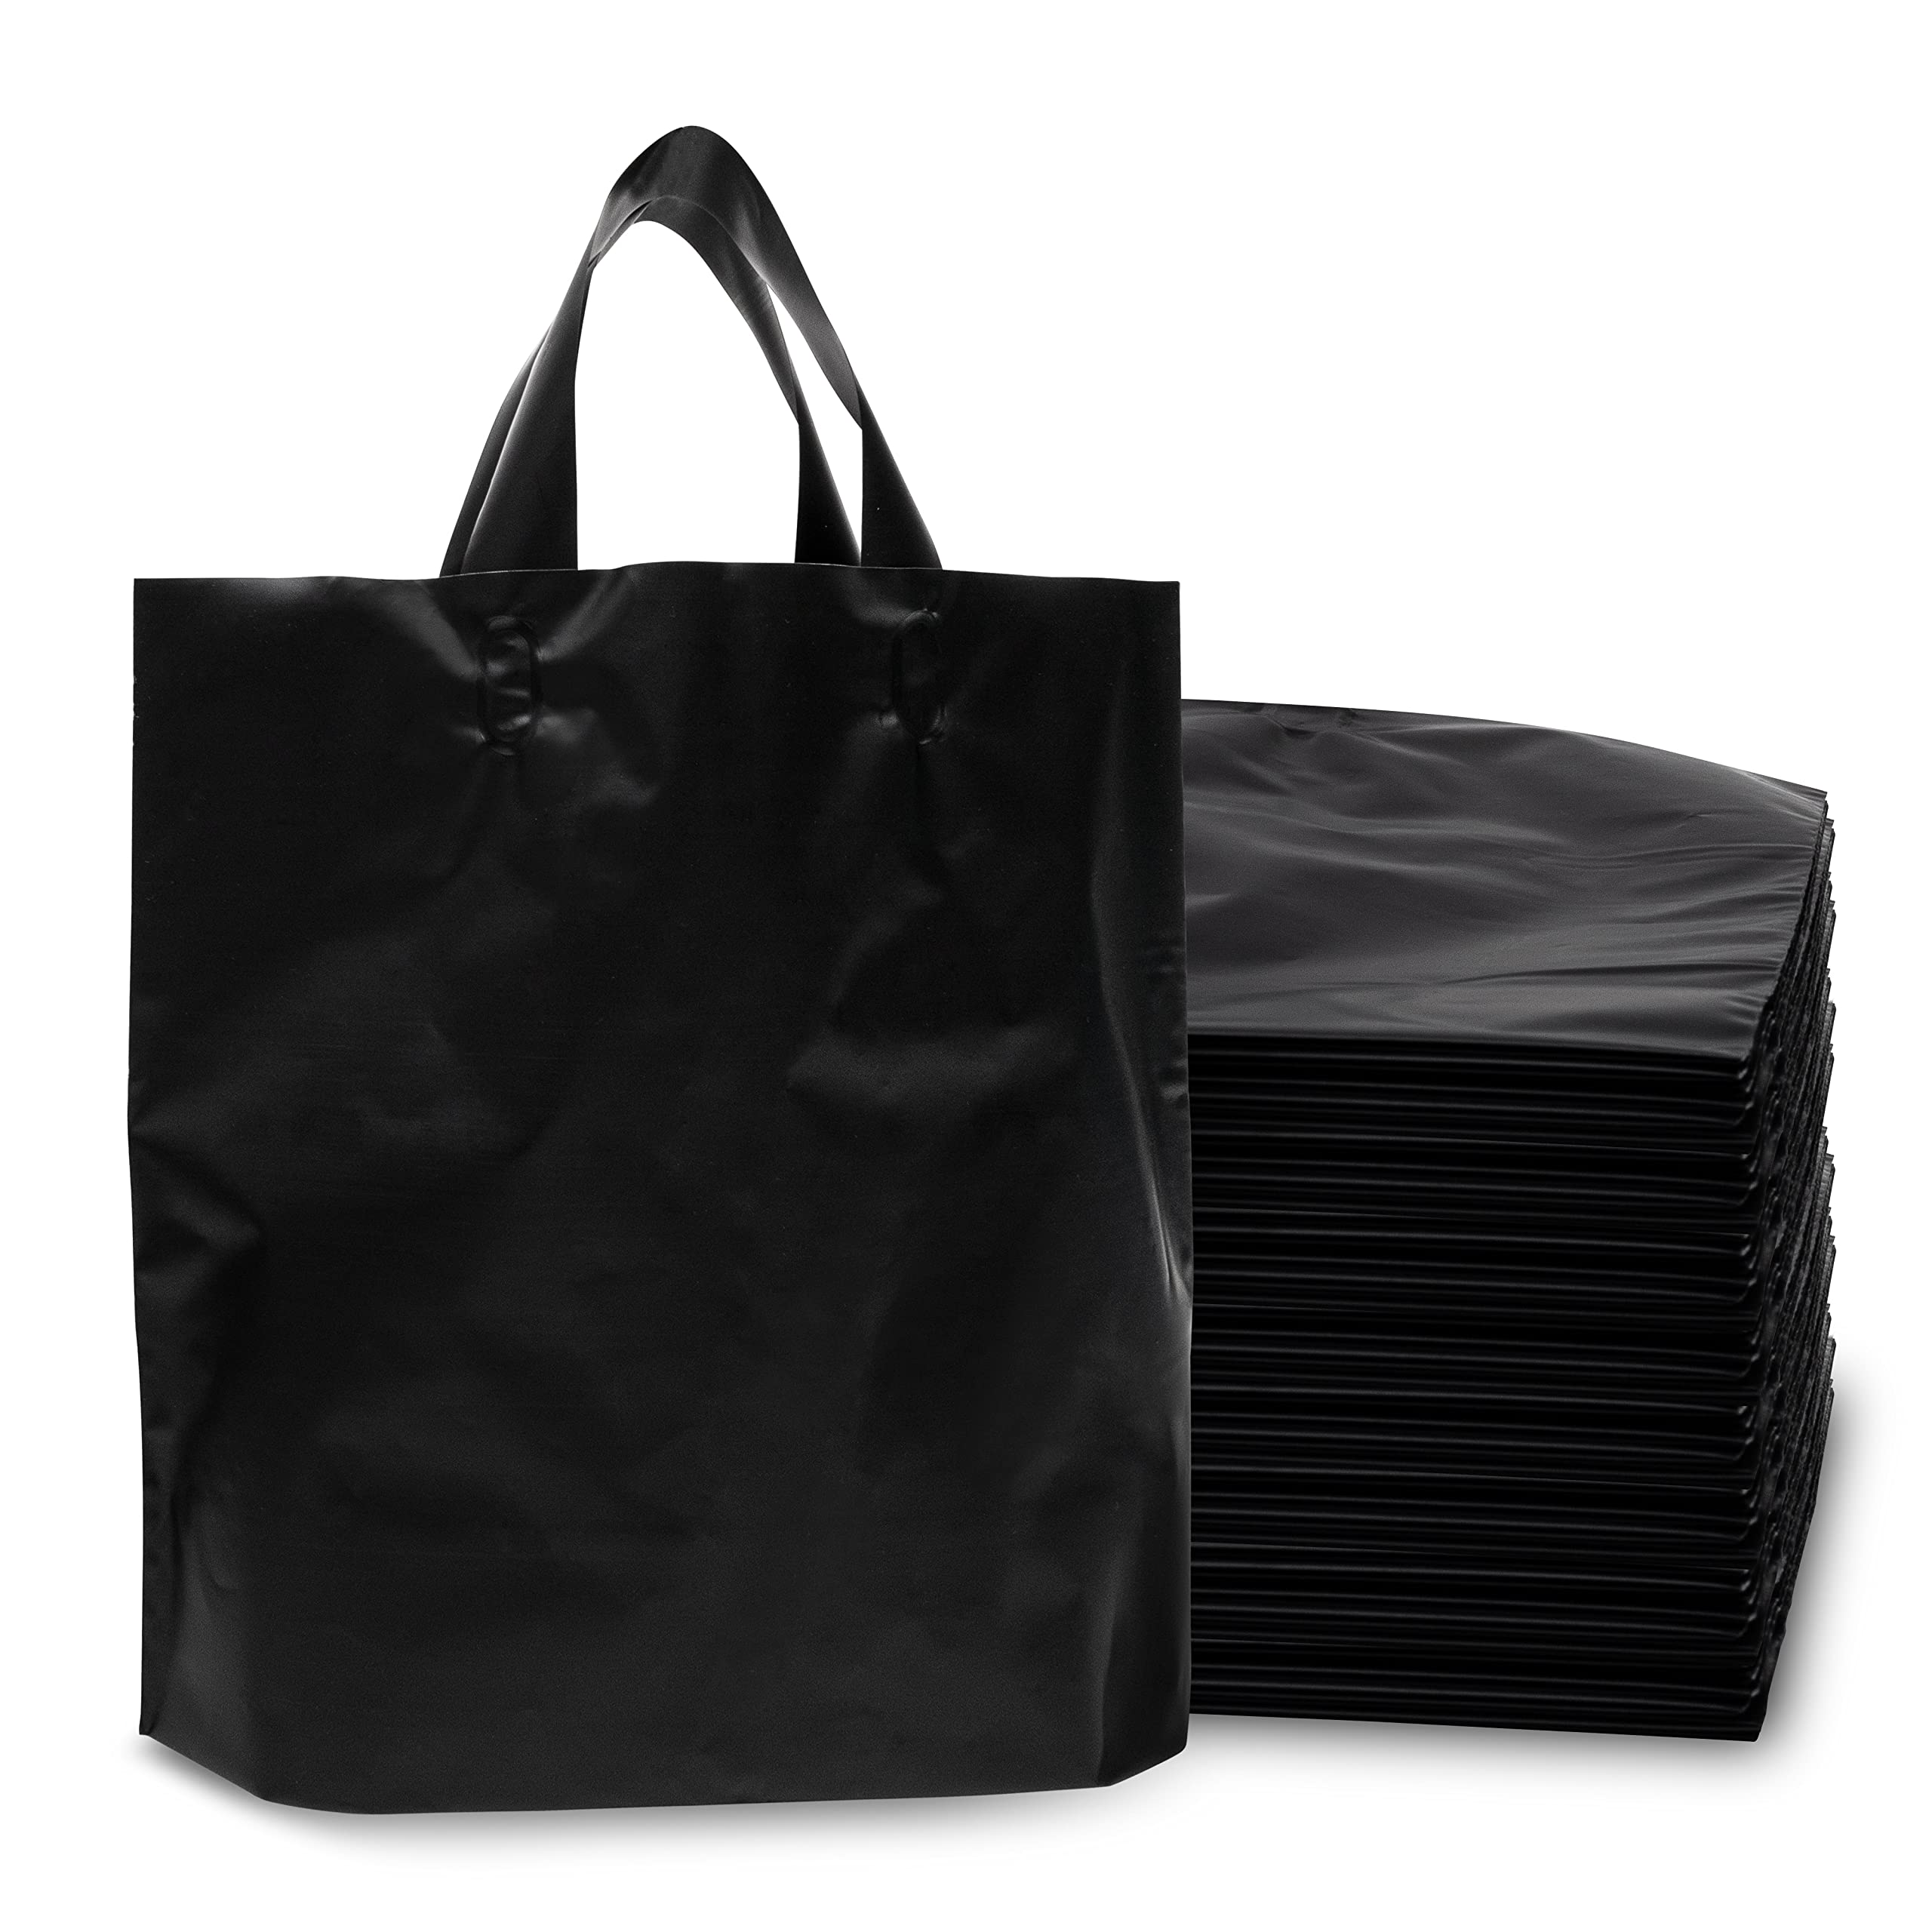 Prime Line Packaging 12x4x10 Inch 50 Pack Medium Black Paper Bag Plastic Shopping Bags with Handles for Small Business, Take Out, Boutique, Bulk  - Like New